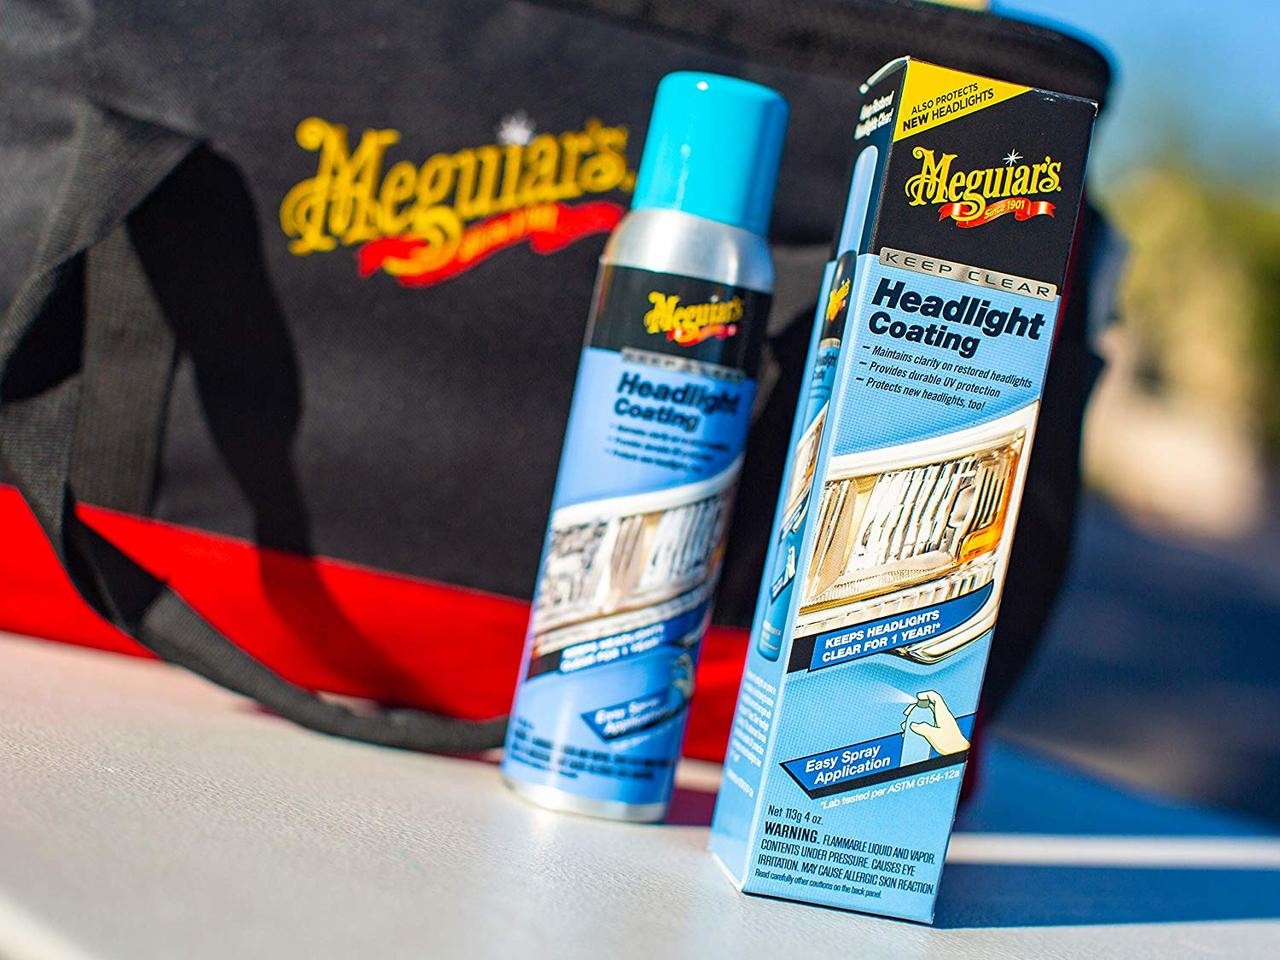 Removing MeGuiars headlight coating - Fixing my mistake — Eightify